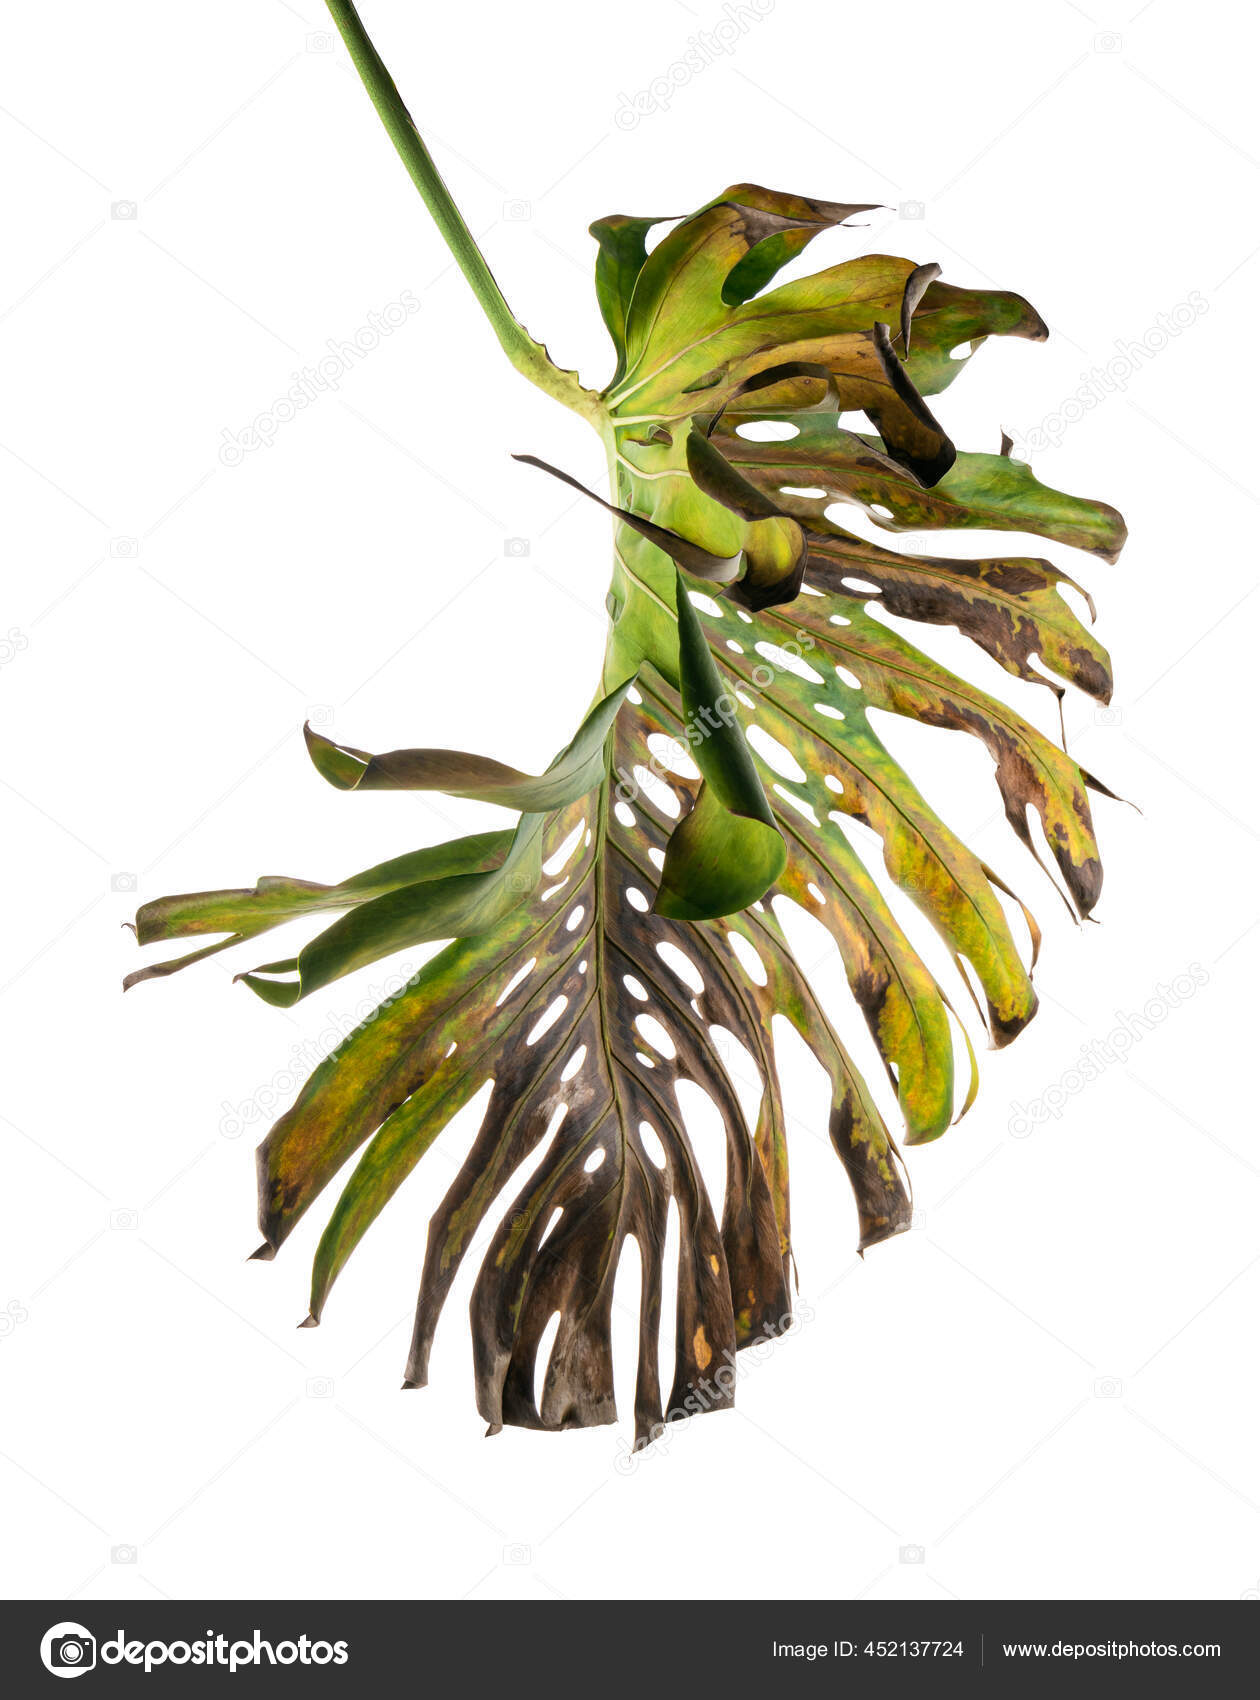 Giant Monstera Pictures Giant Monstera Stock Photos Images Depositphotos